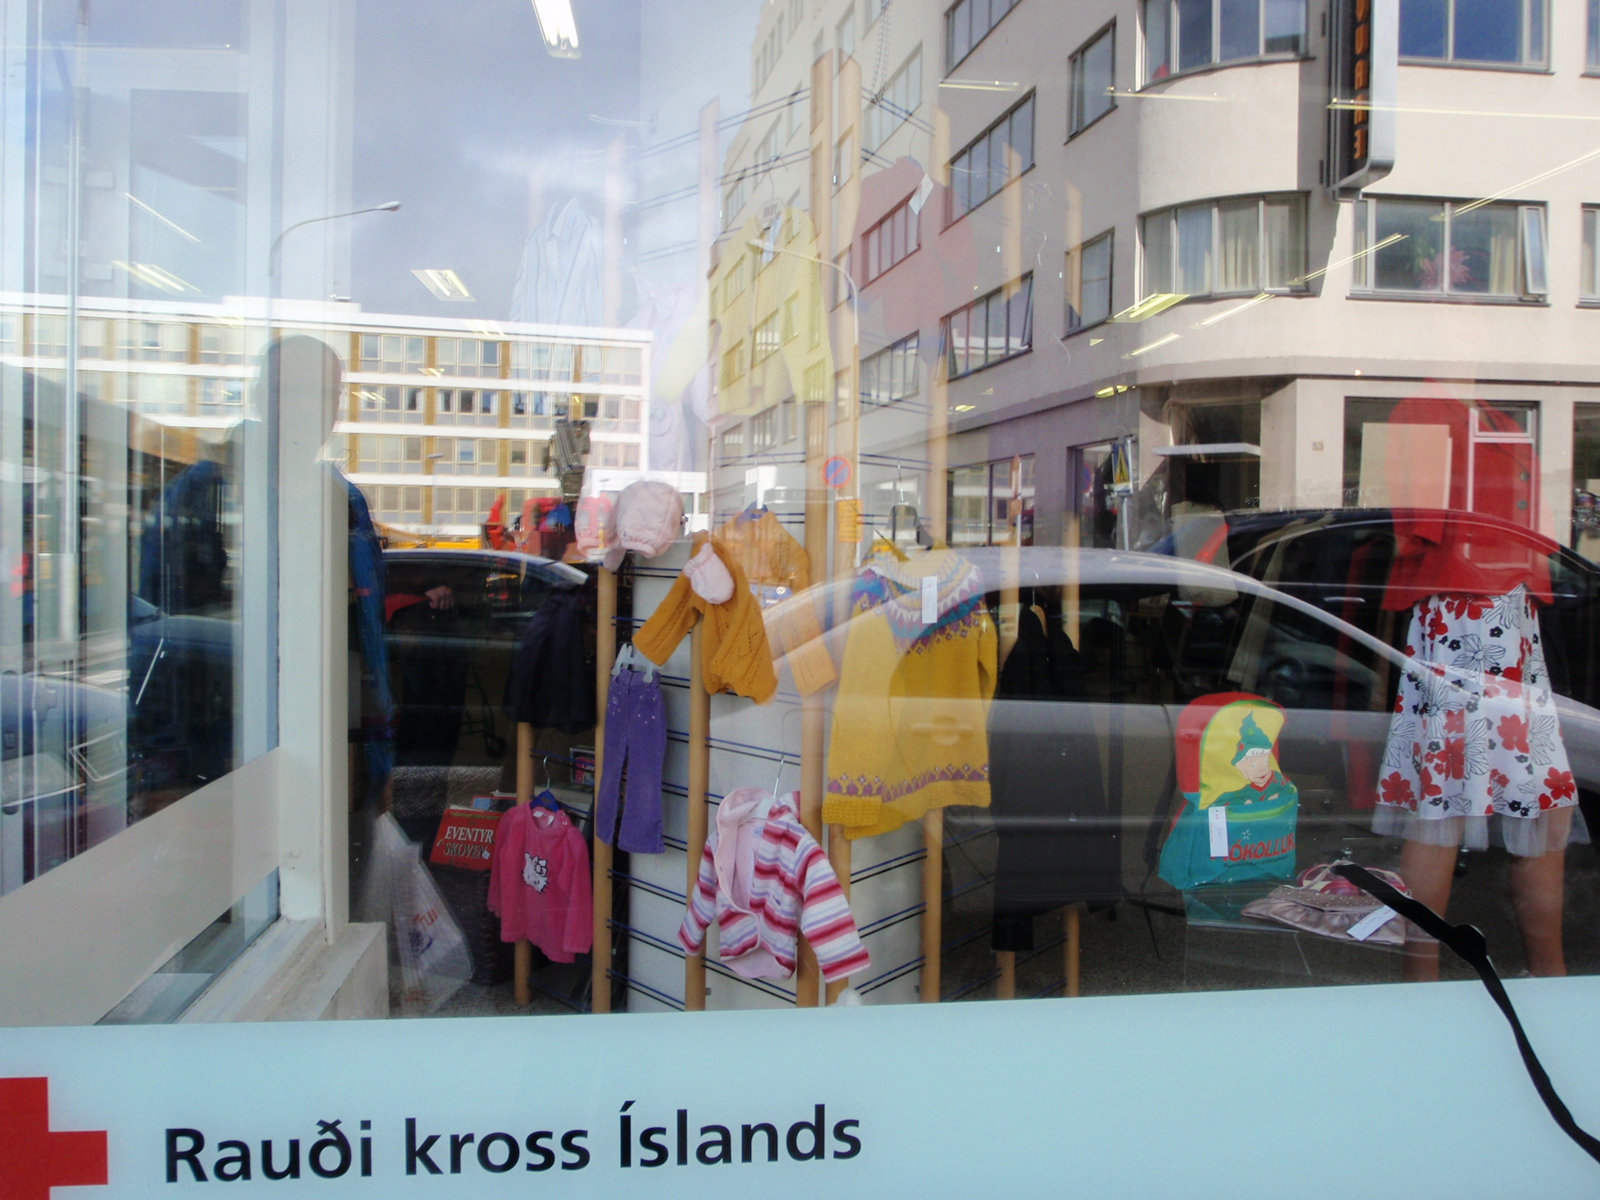 The Reykjavik Red Cross where you won't get in a slap fight over a sweater.